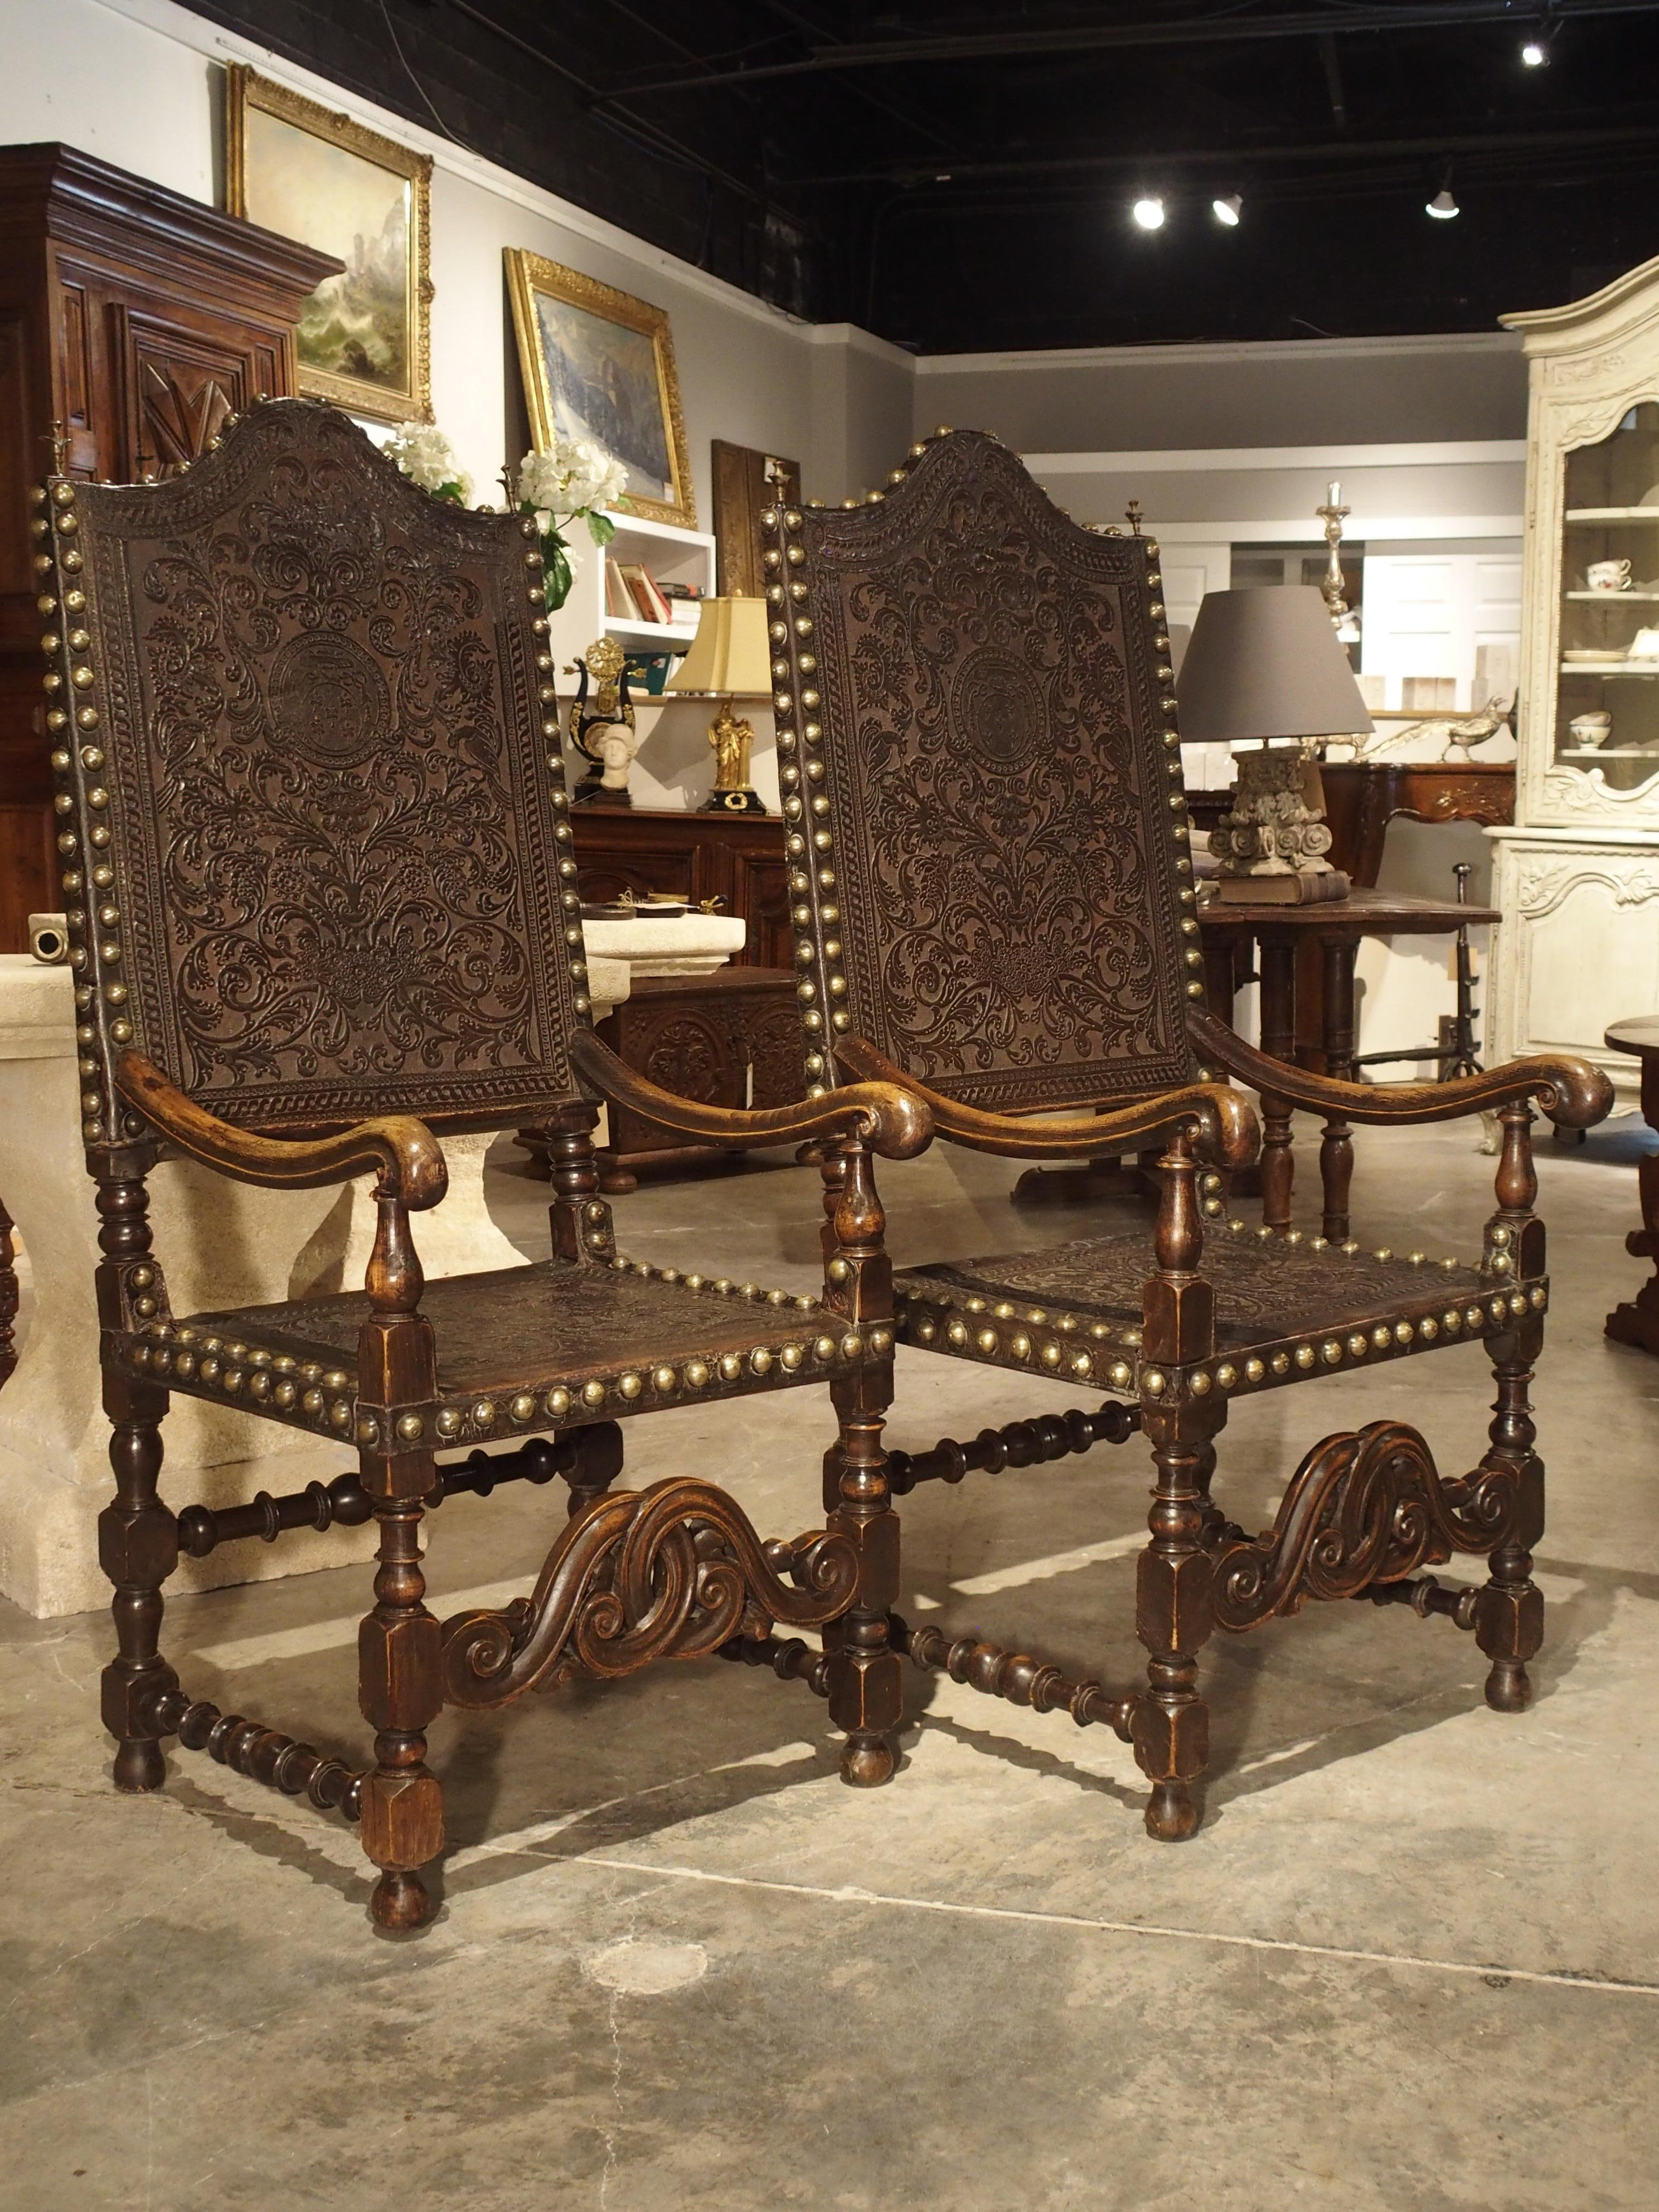 Renaissance Pair of Large 17th Century Tooled Leather and Oak Armchairs from Spain